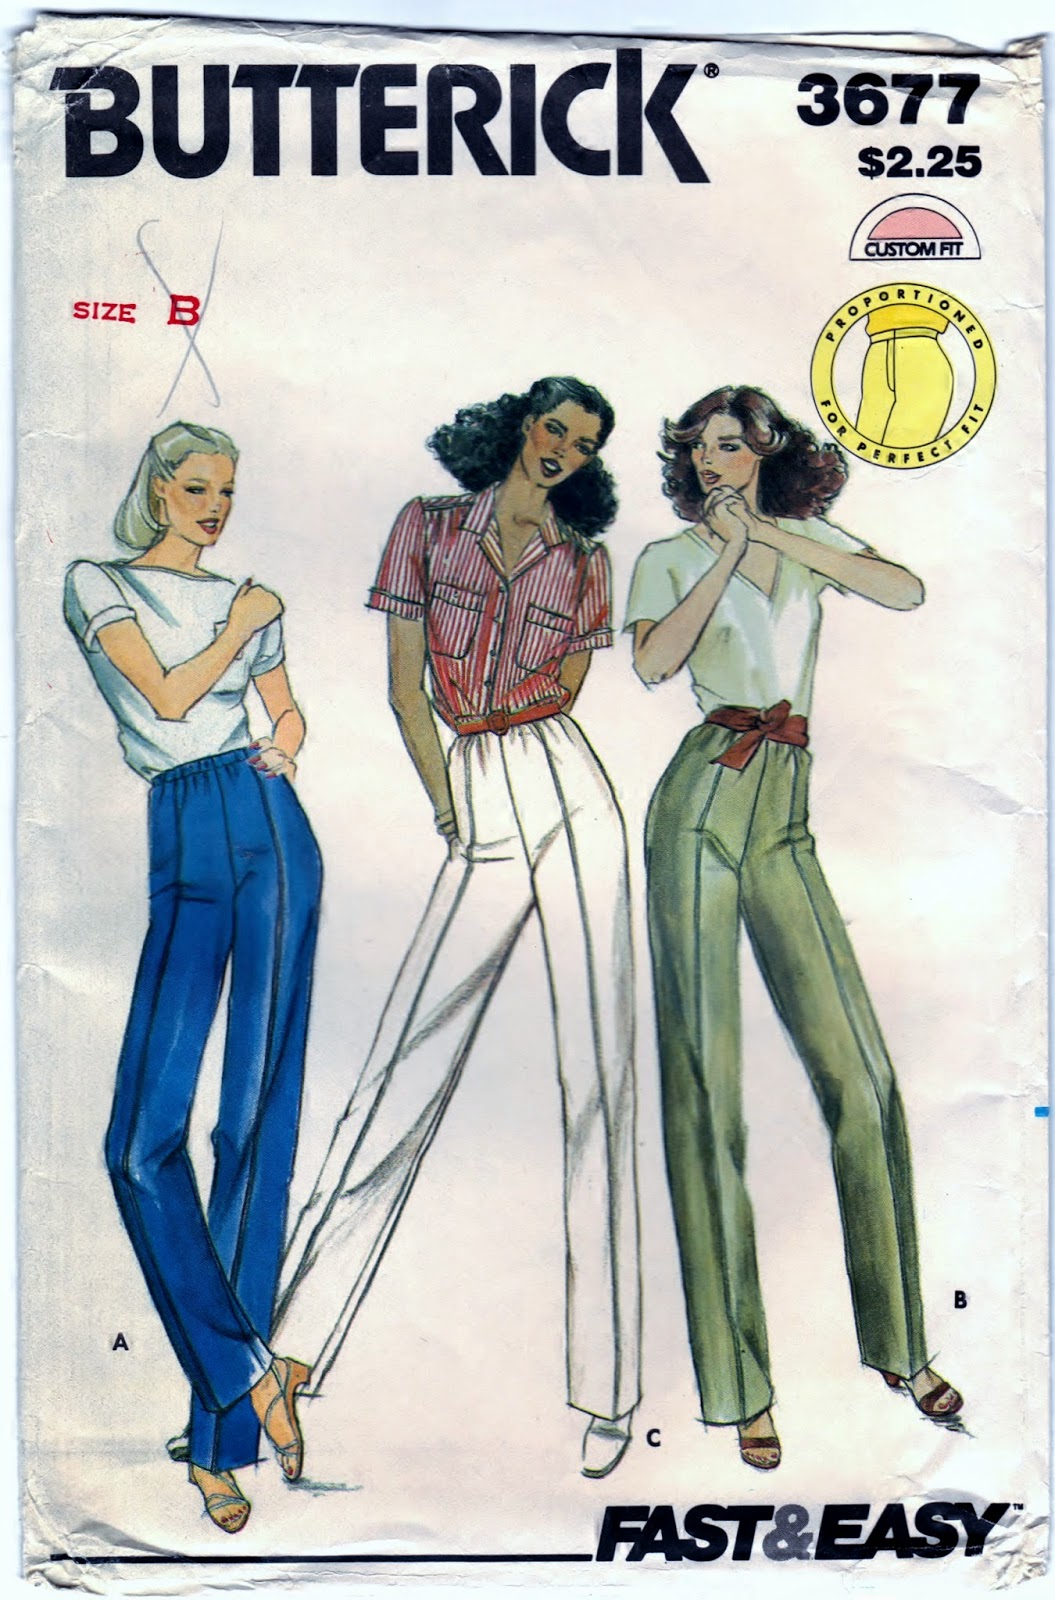 https://www.etsy.com/listing/220352685/butterick-3677-sewing-craft-pattern